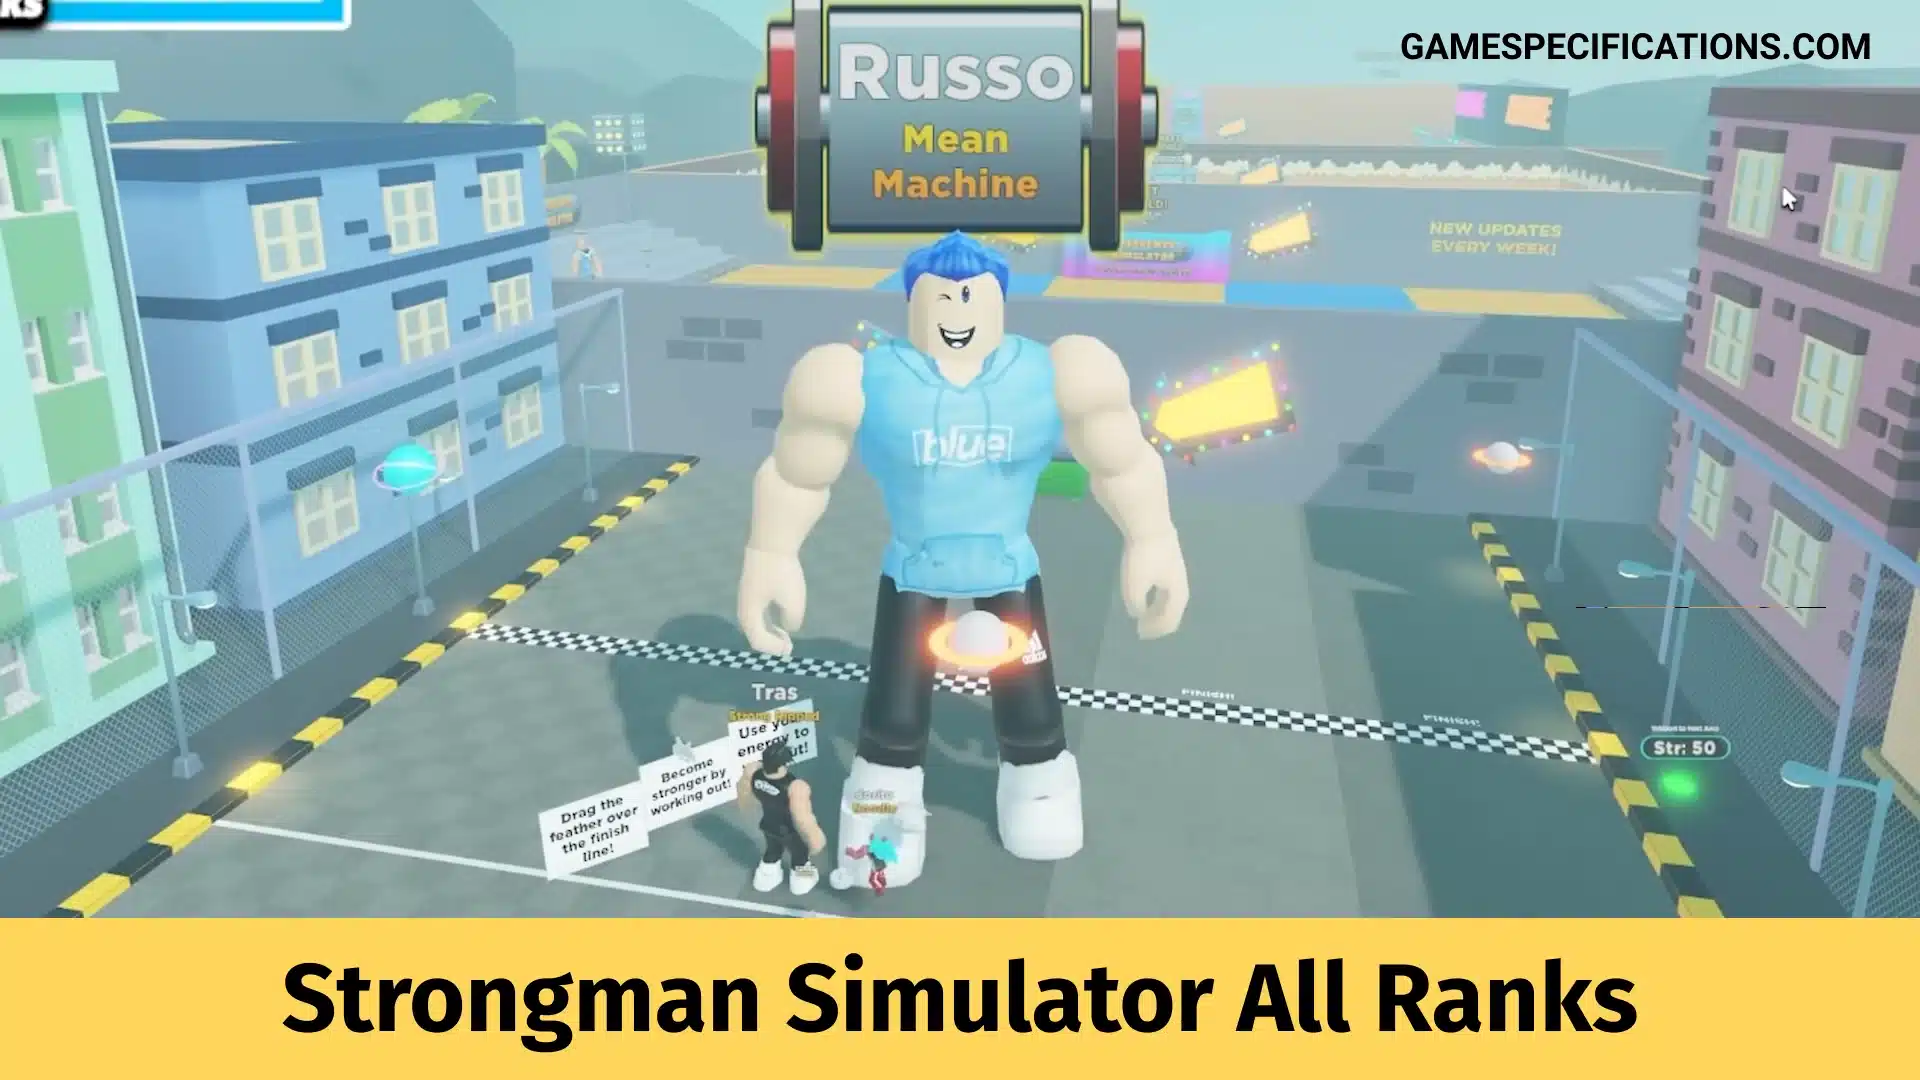 SPACE* UPDATE FREE ENERGY BOOST ALL WORKING CODES STRONGMAN SIMULATOR ROBLOX